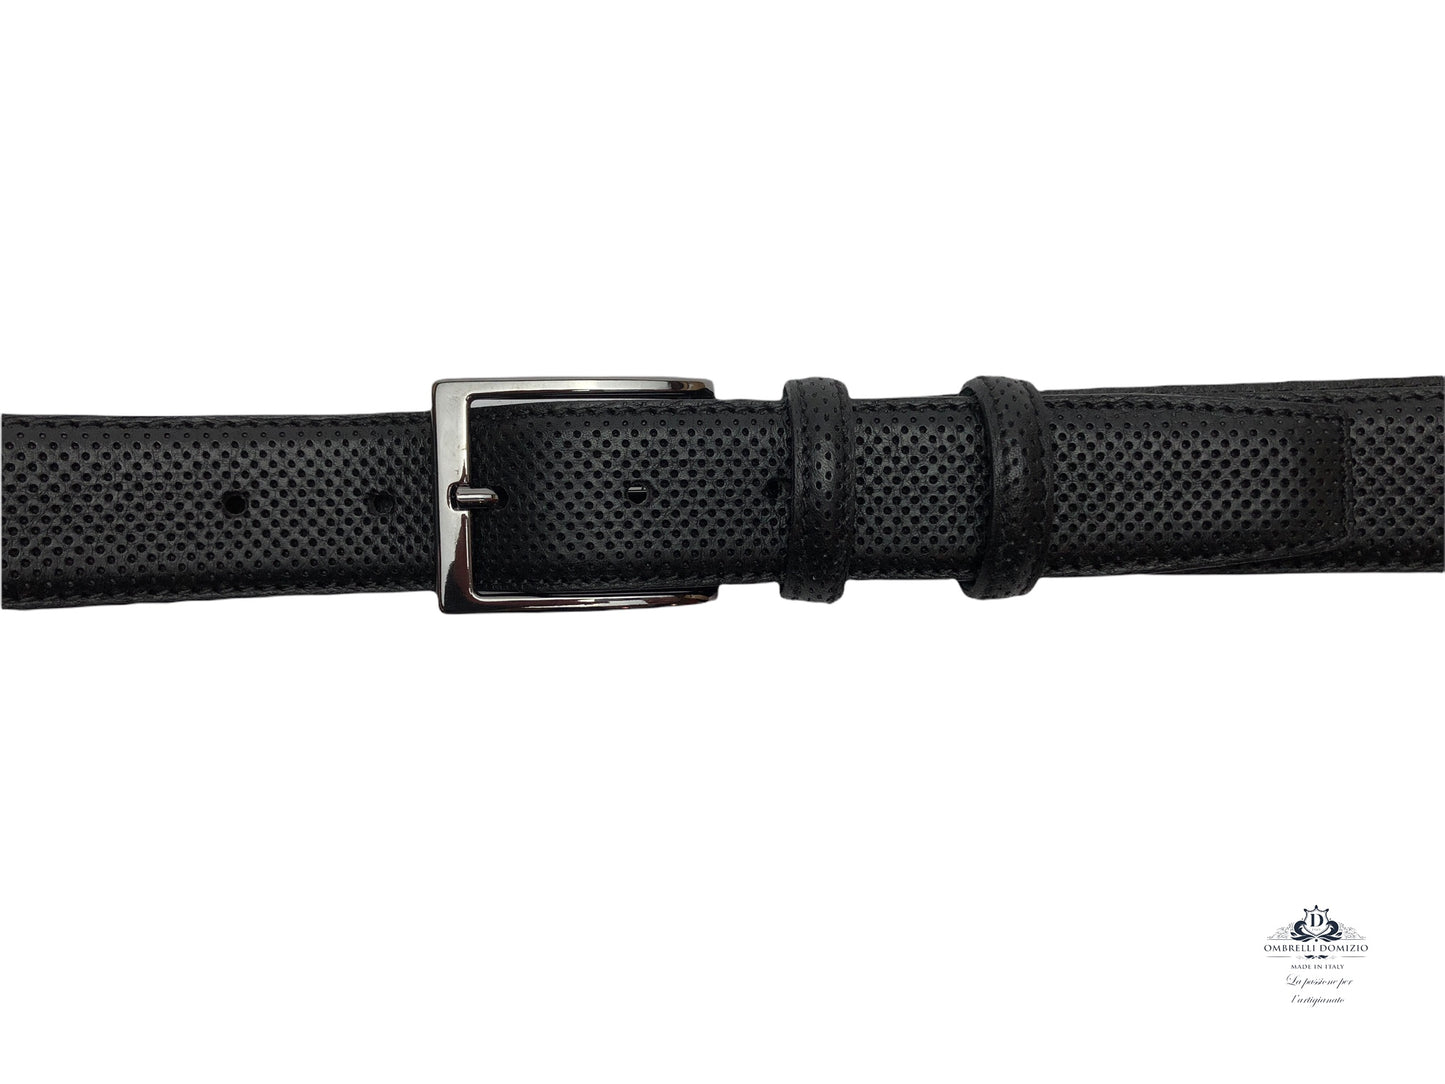 Pressed leather belt Honeycomb col. Black artisanal workmanship Made in Italy